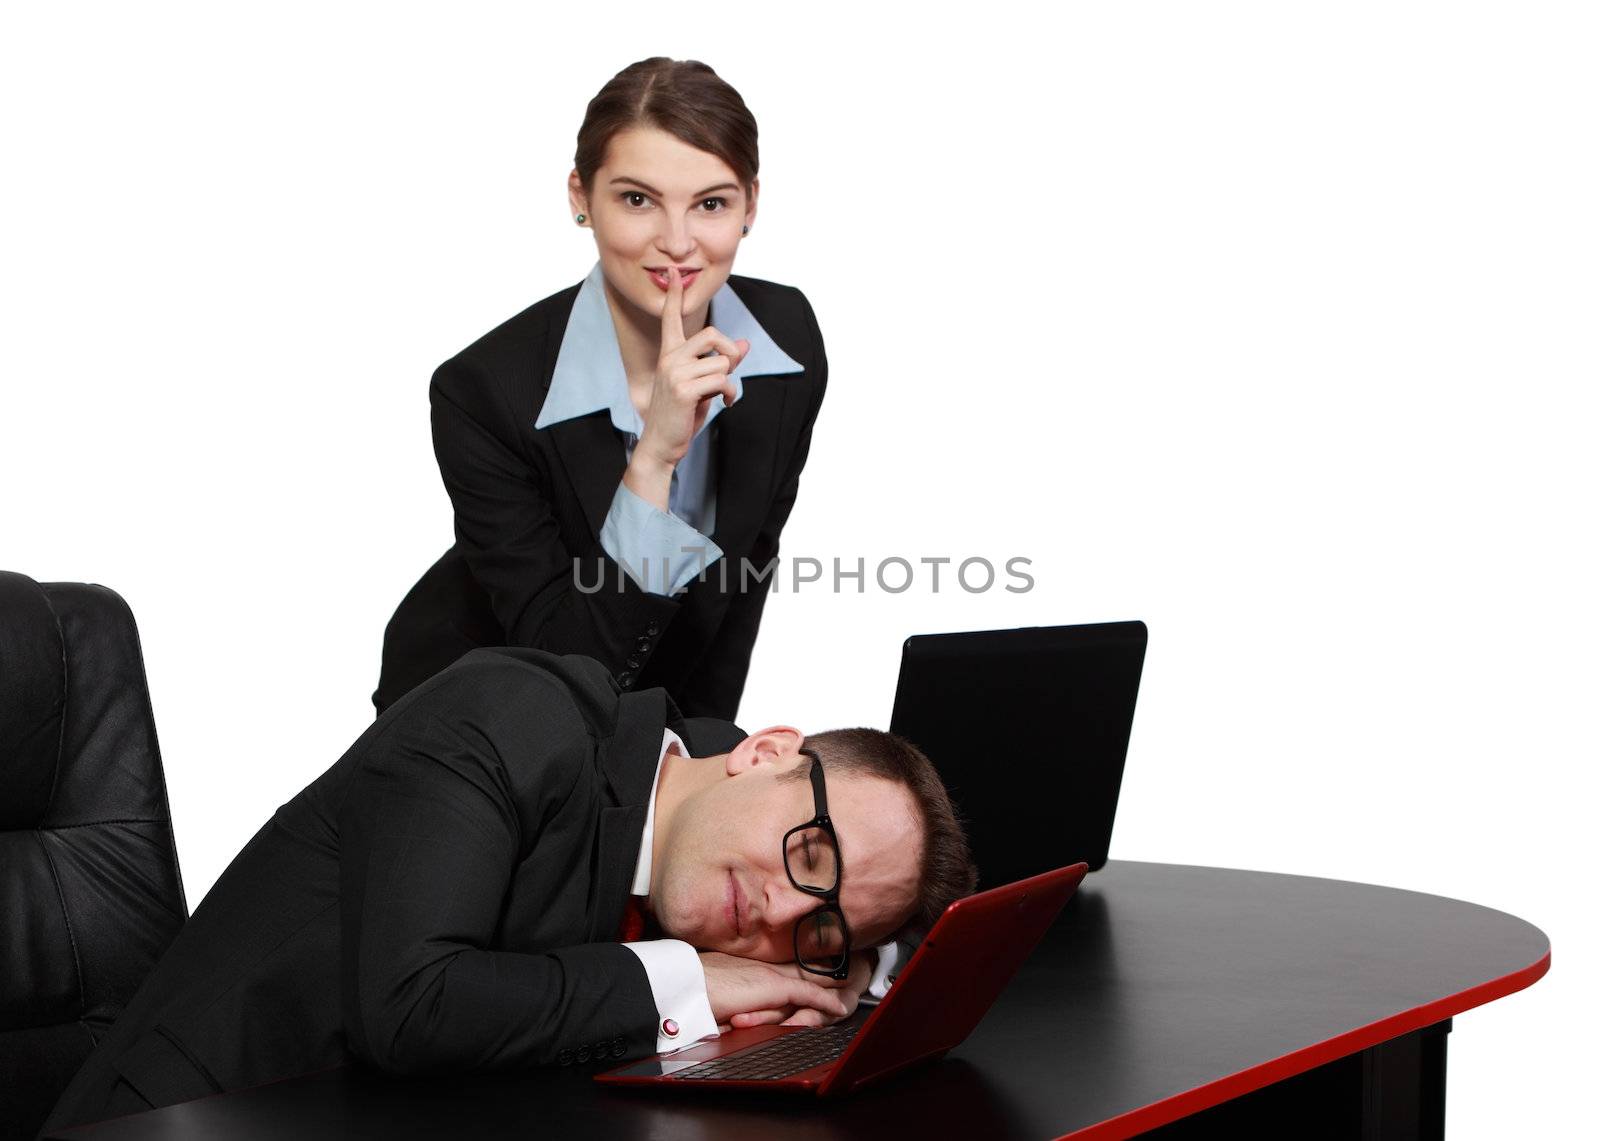 The secretary keeps silence while her tired boss dozing on the desk in front of his noteboook.